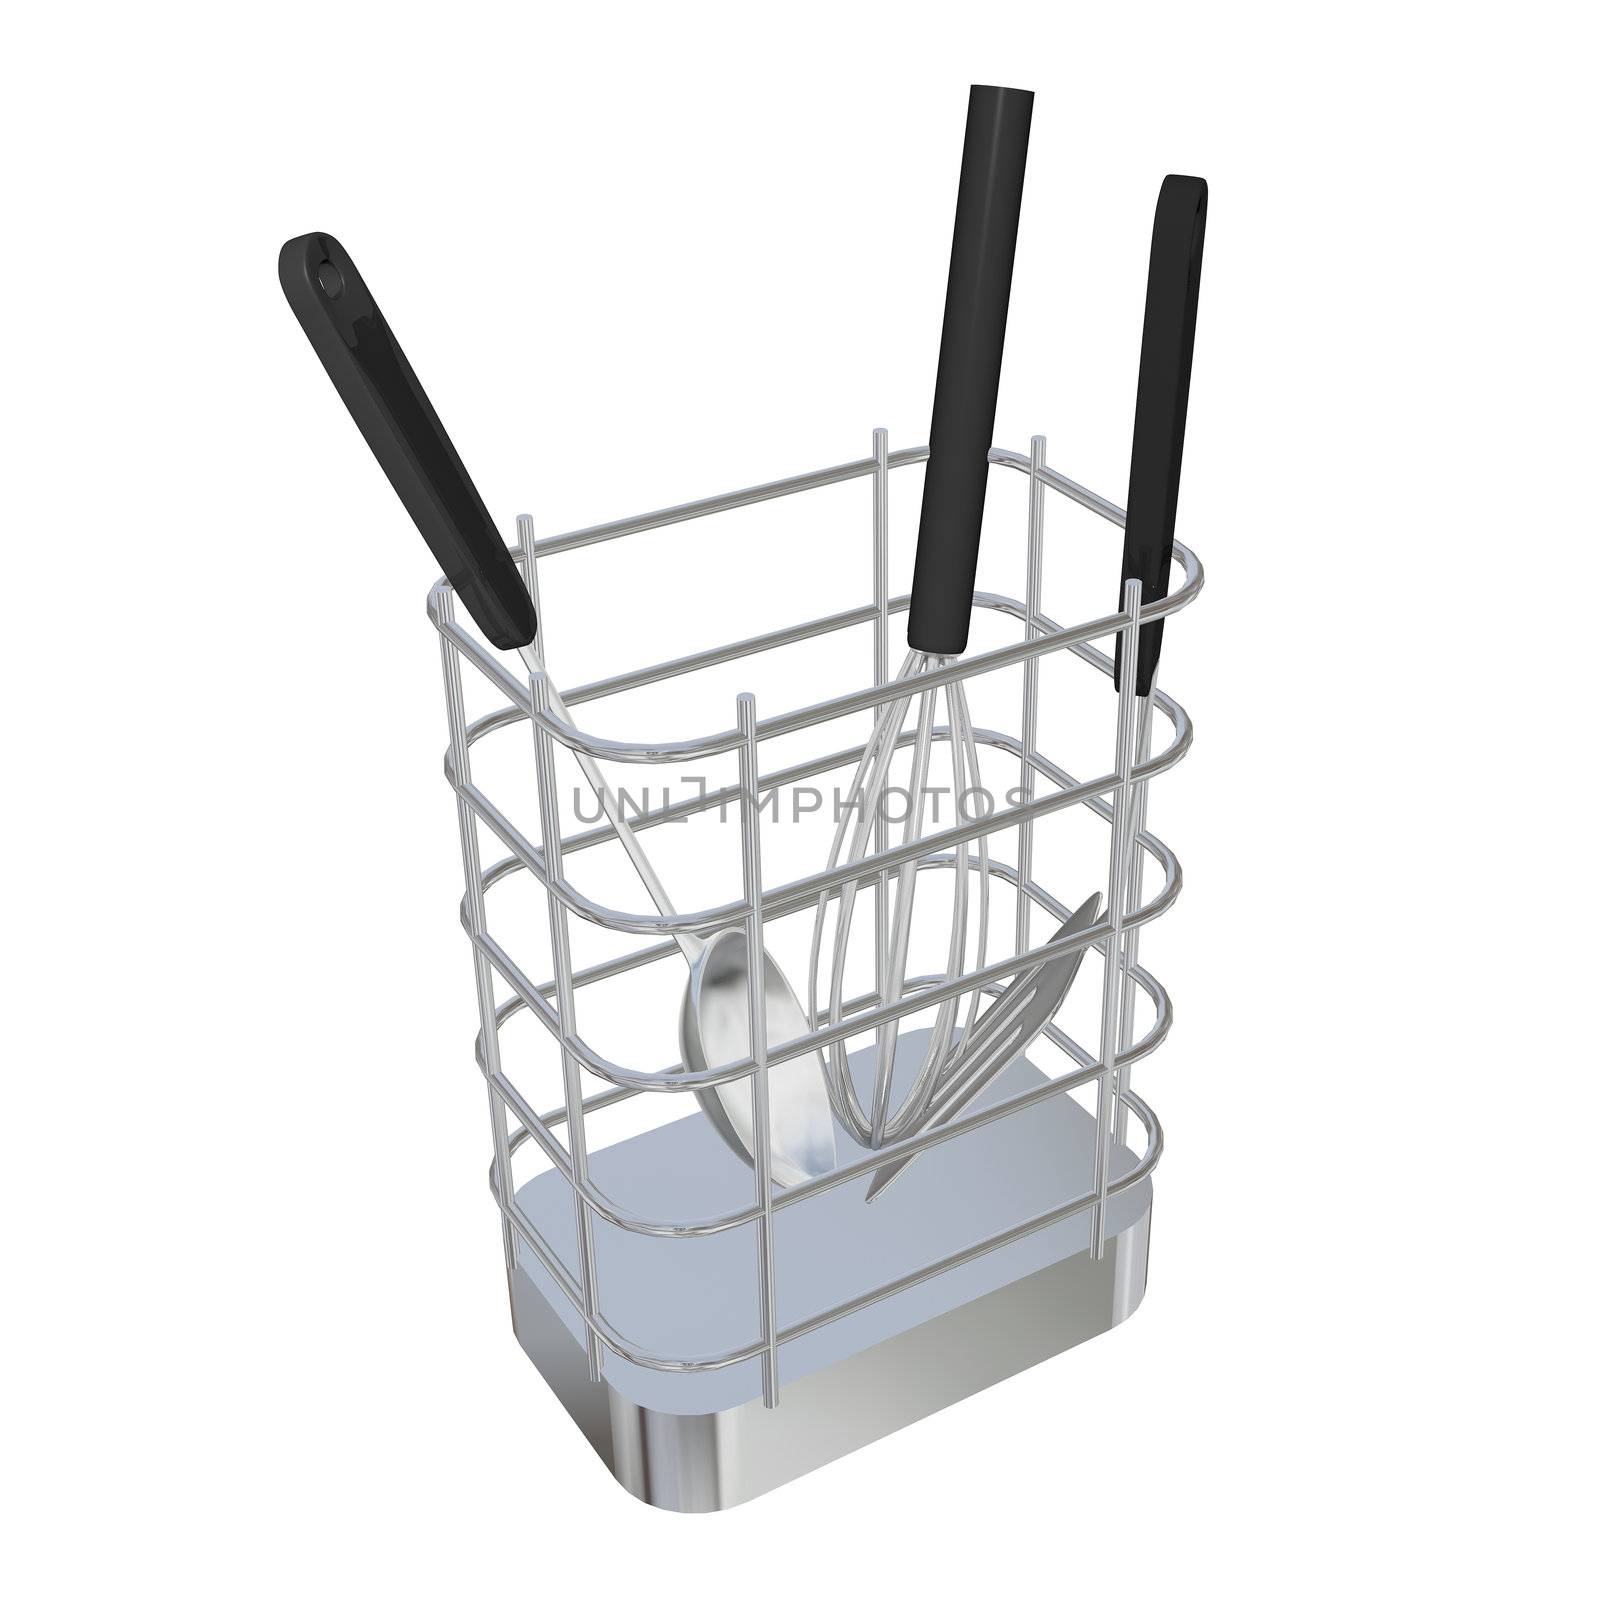 Stainless steel wire basket rack or holder with frying laddle, s by Morphart